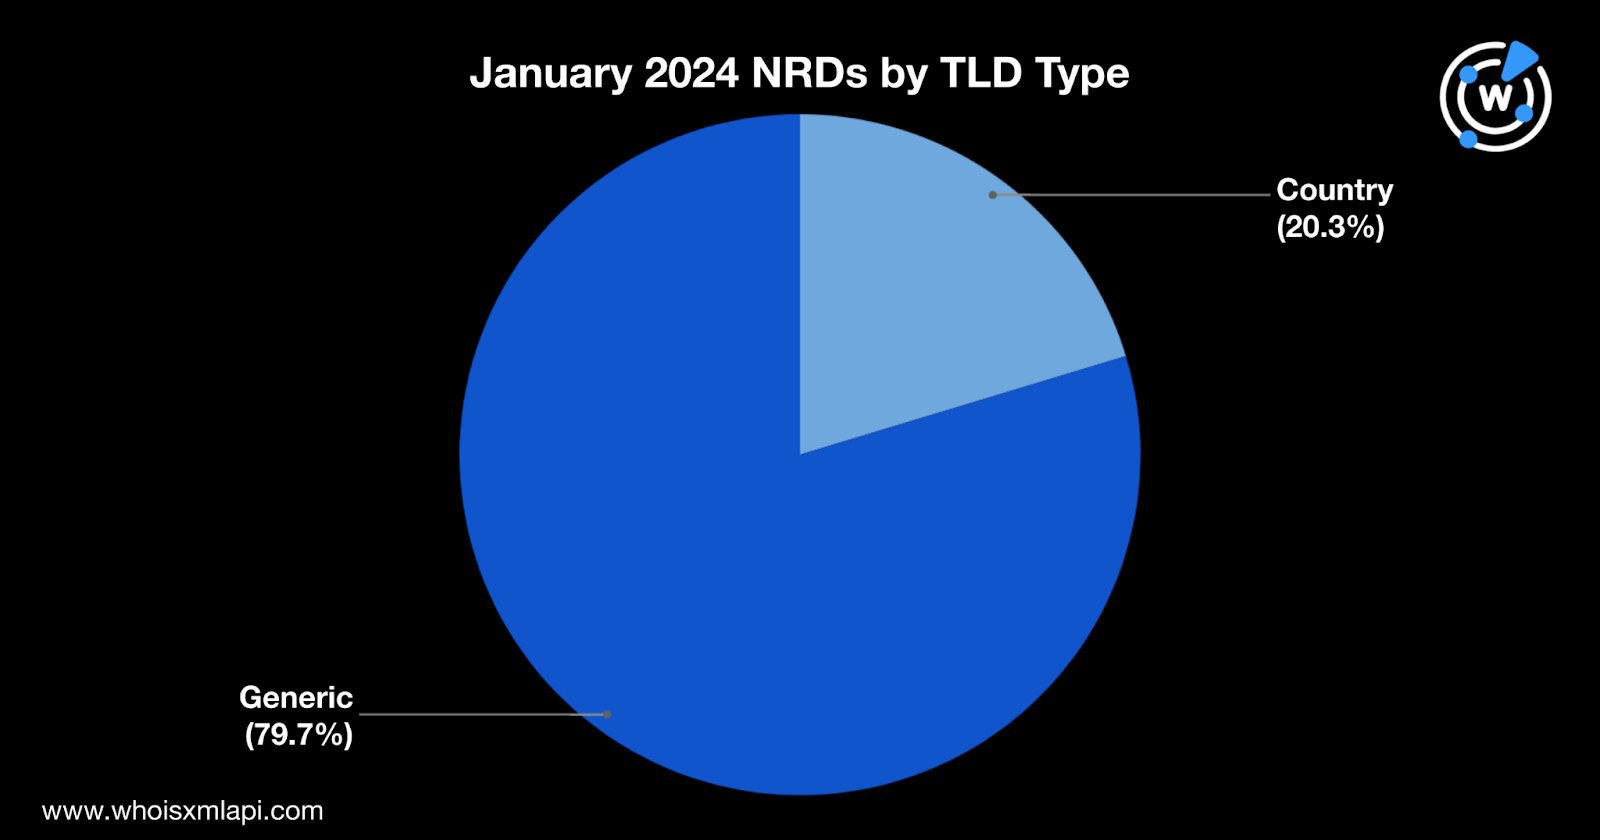 January 2024 NRDs by TLD type